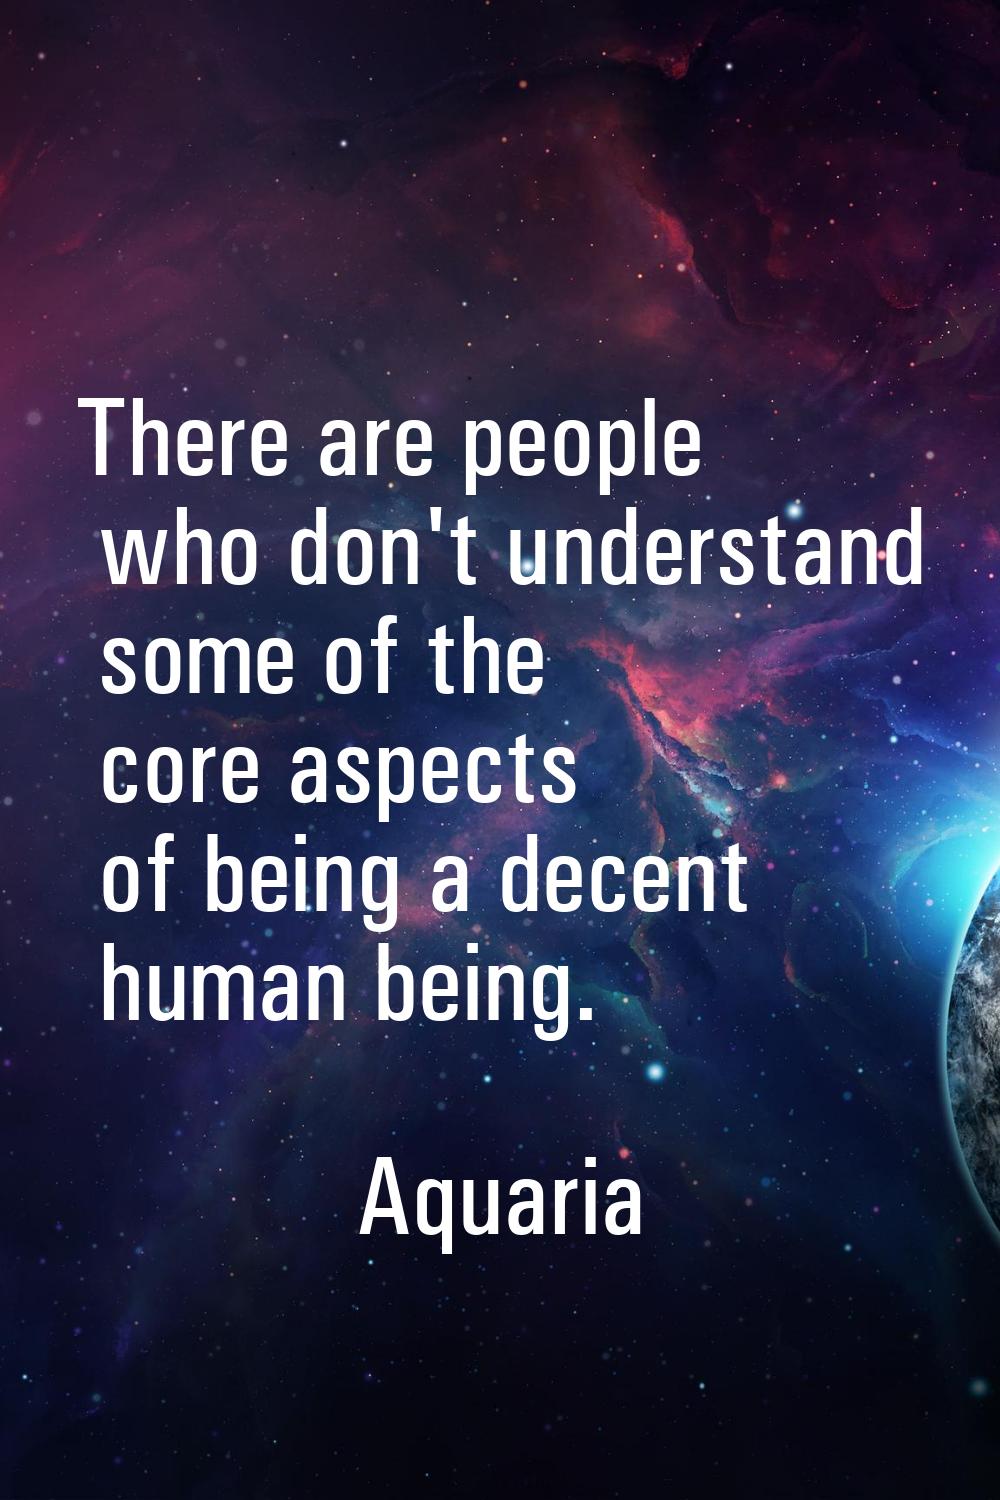 There are people who don't understand some of the core aspects of being a decent human being.